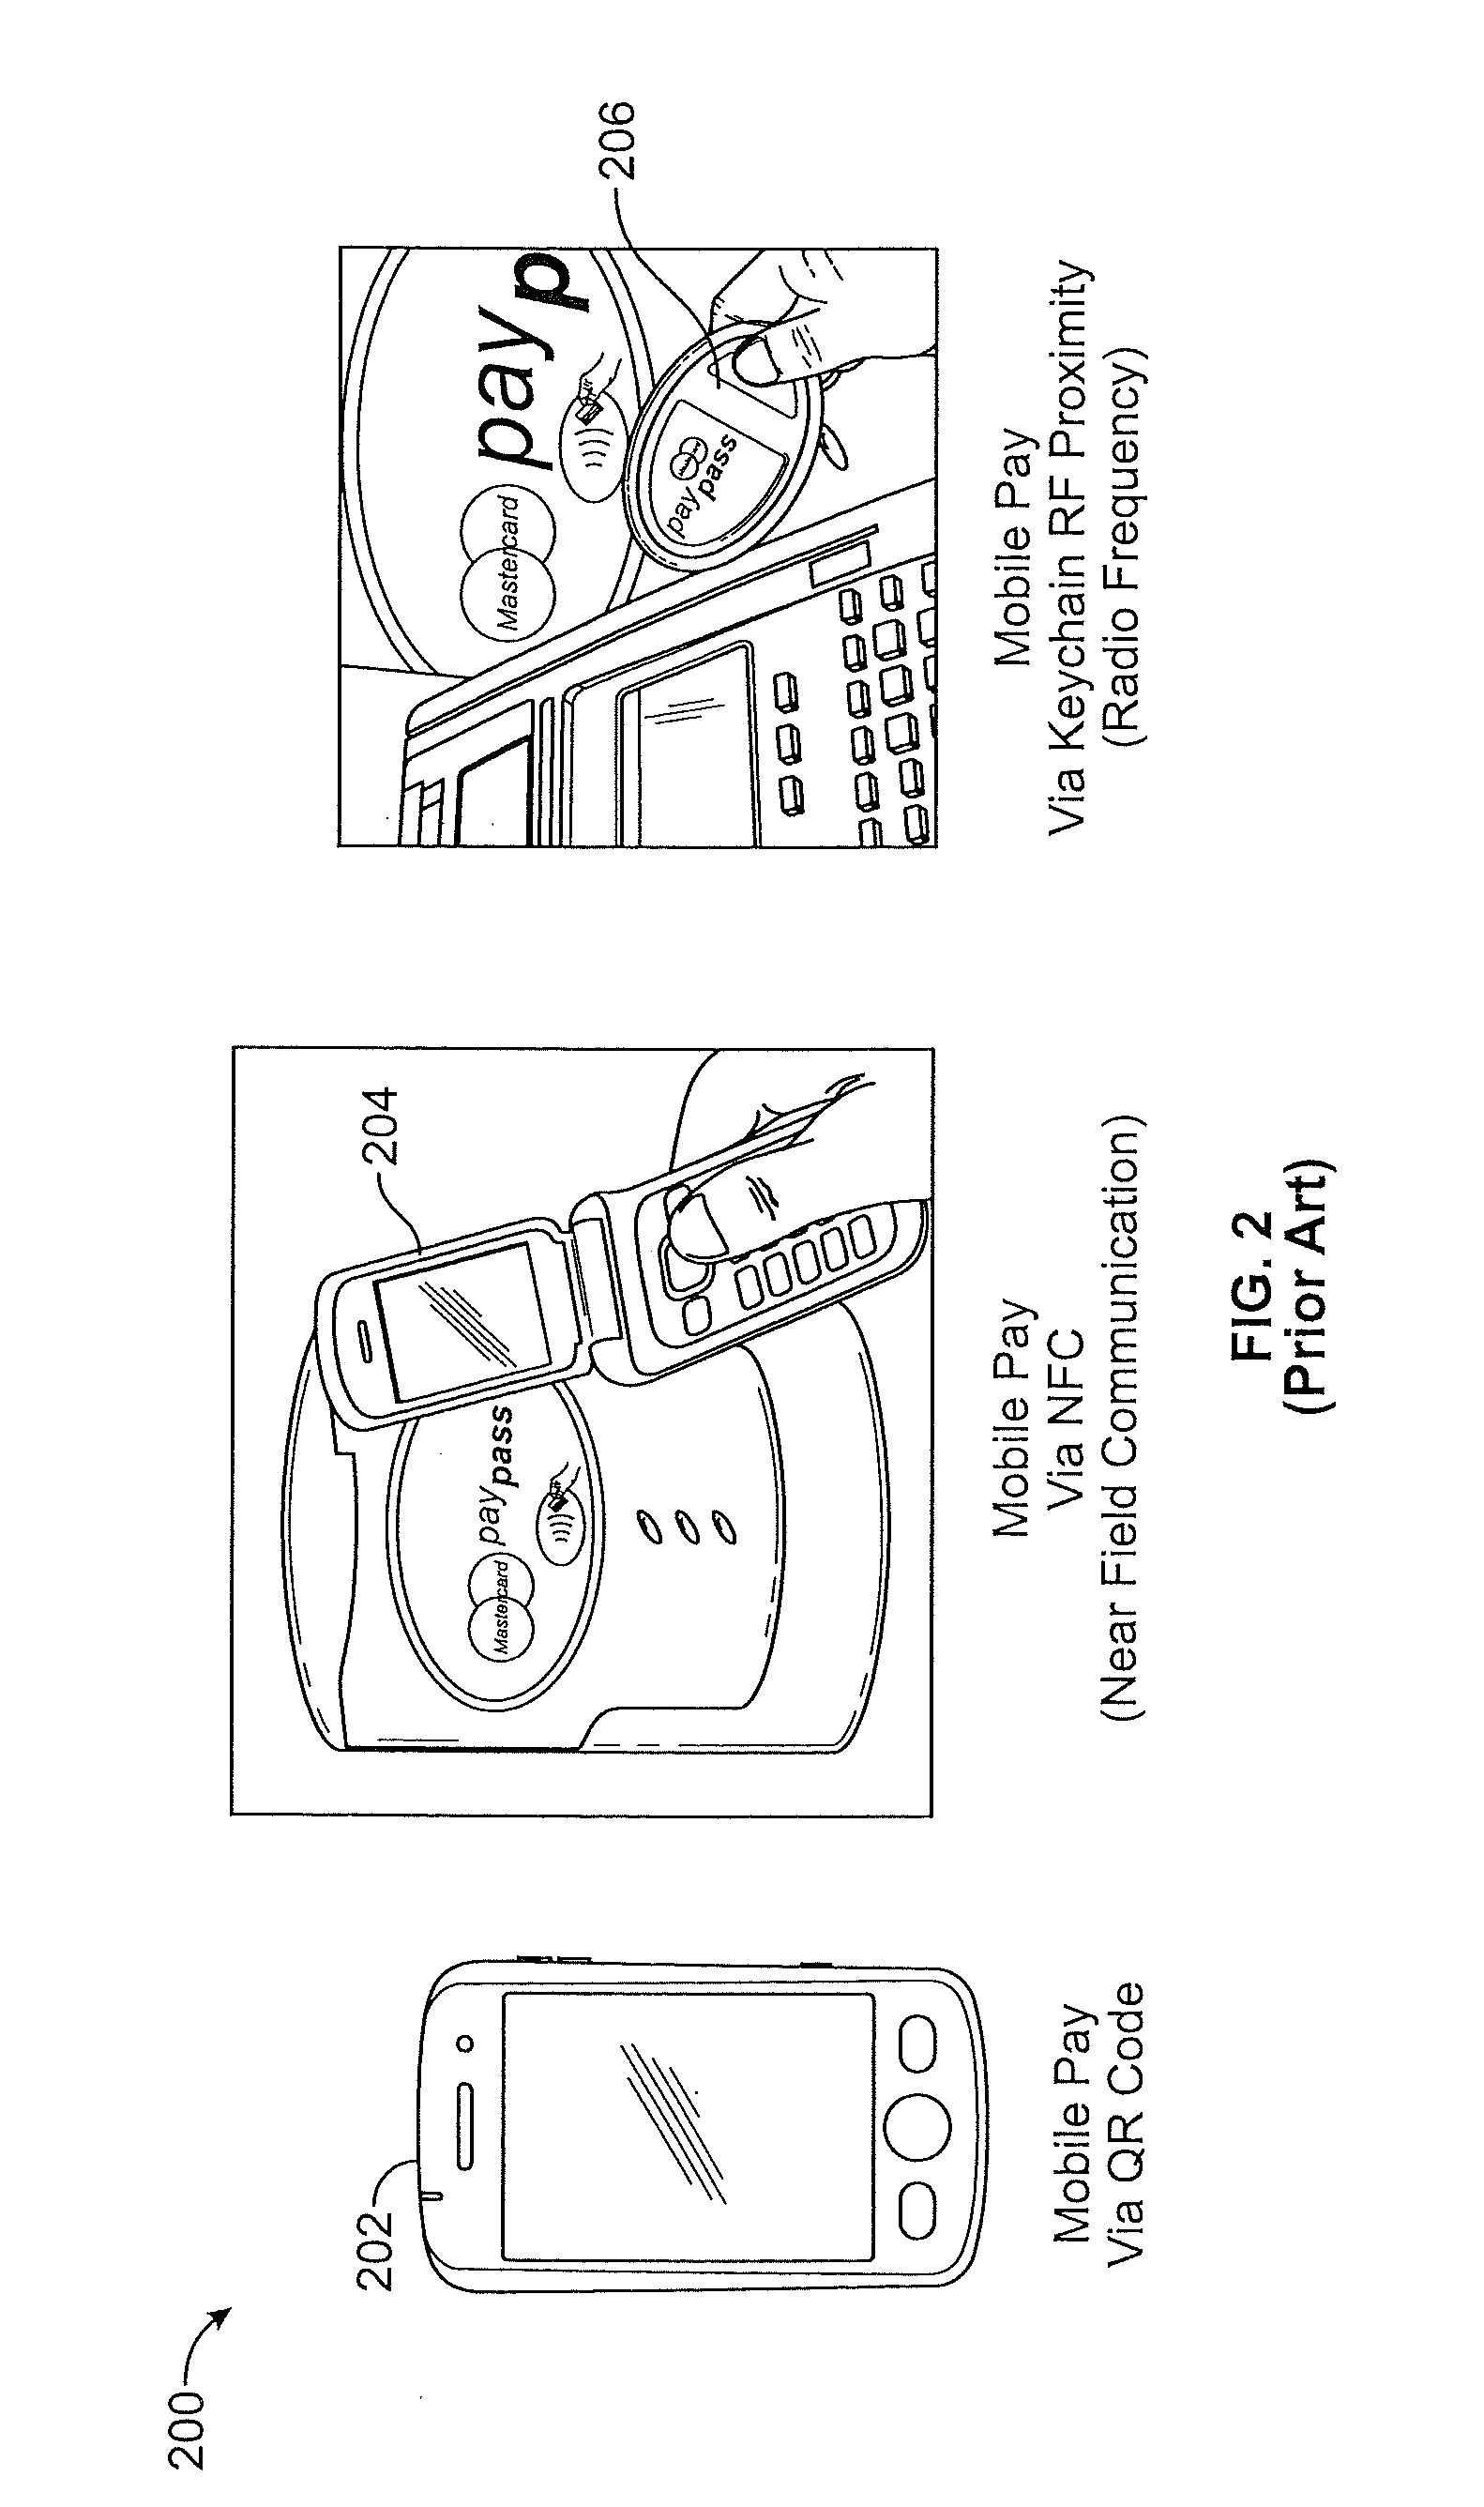 Real-Time Multi-Merchant Multi-Payer Multi-Bucket Open Loop Debit Card, Credit Card or Mobile Payment Device Value Tracking and Discount Processing Systems and Related Methods